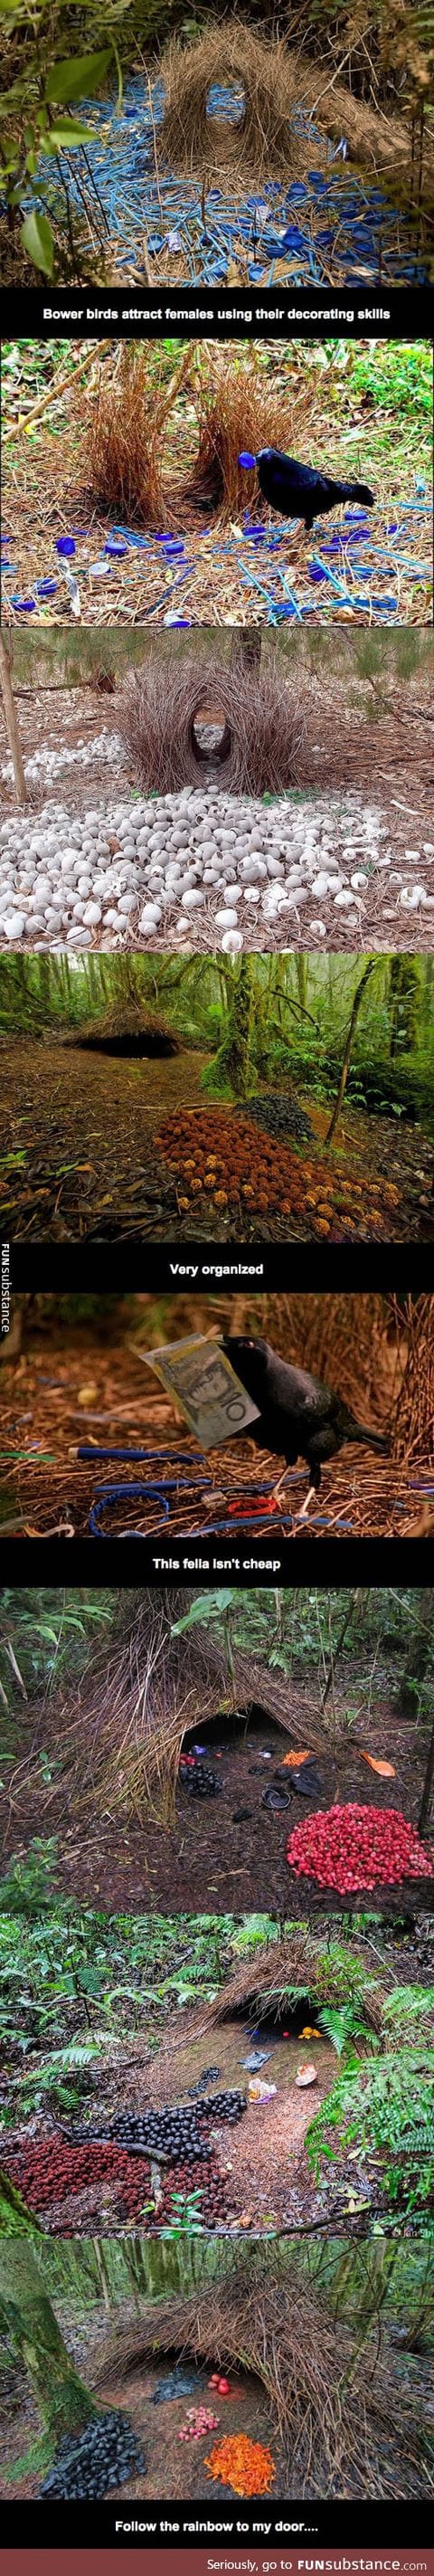 Bower birds are awesome